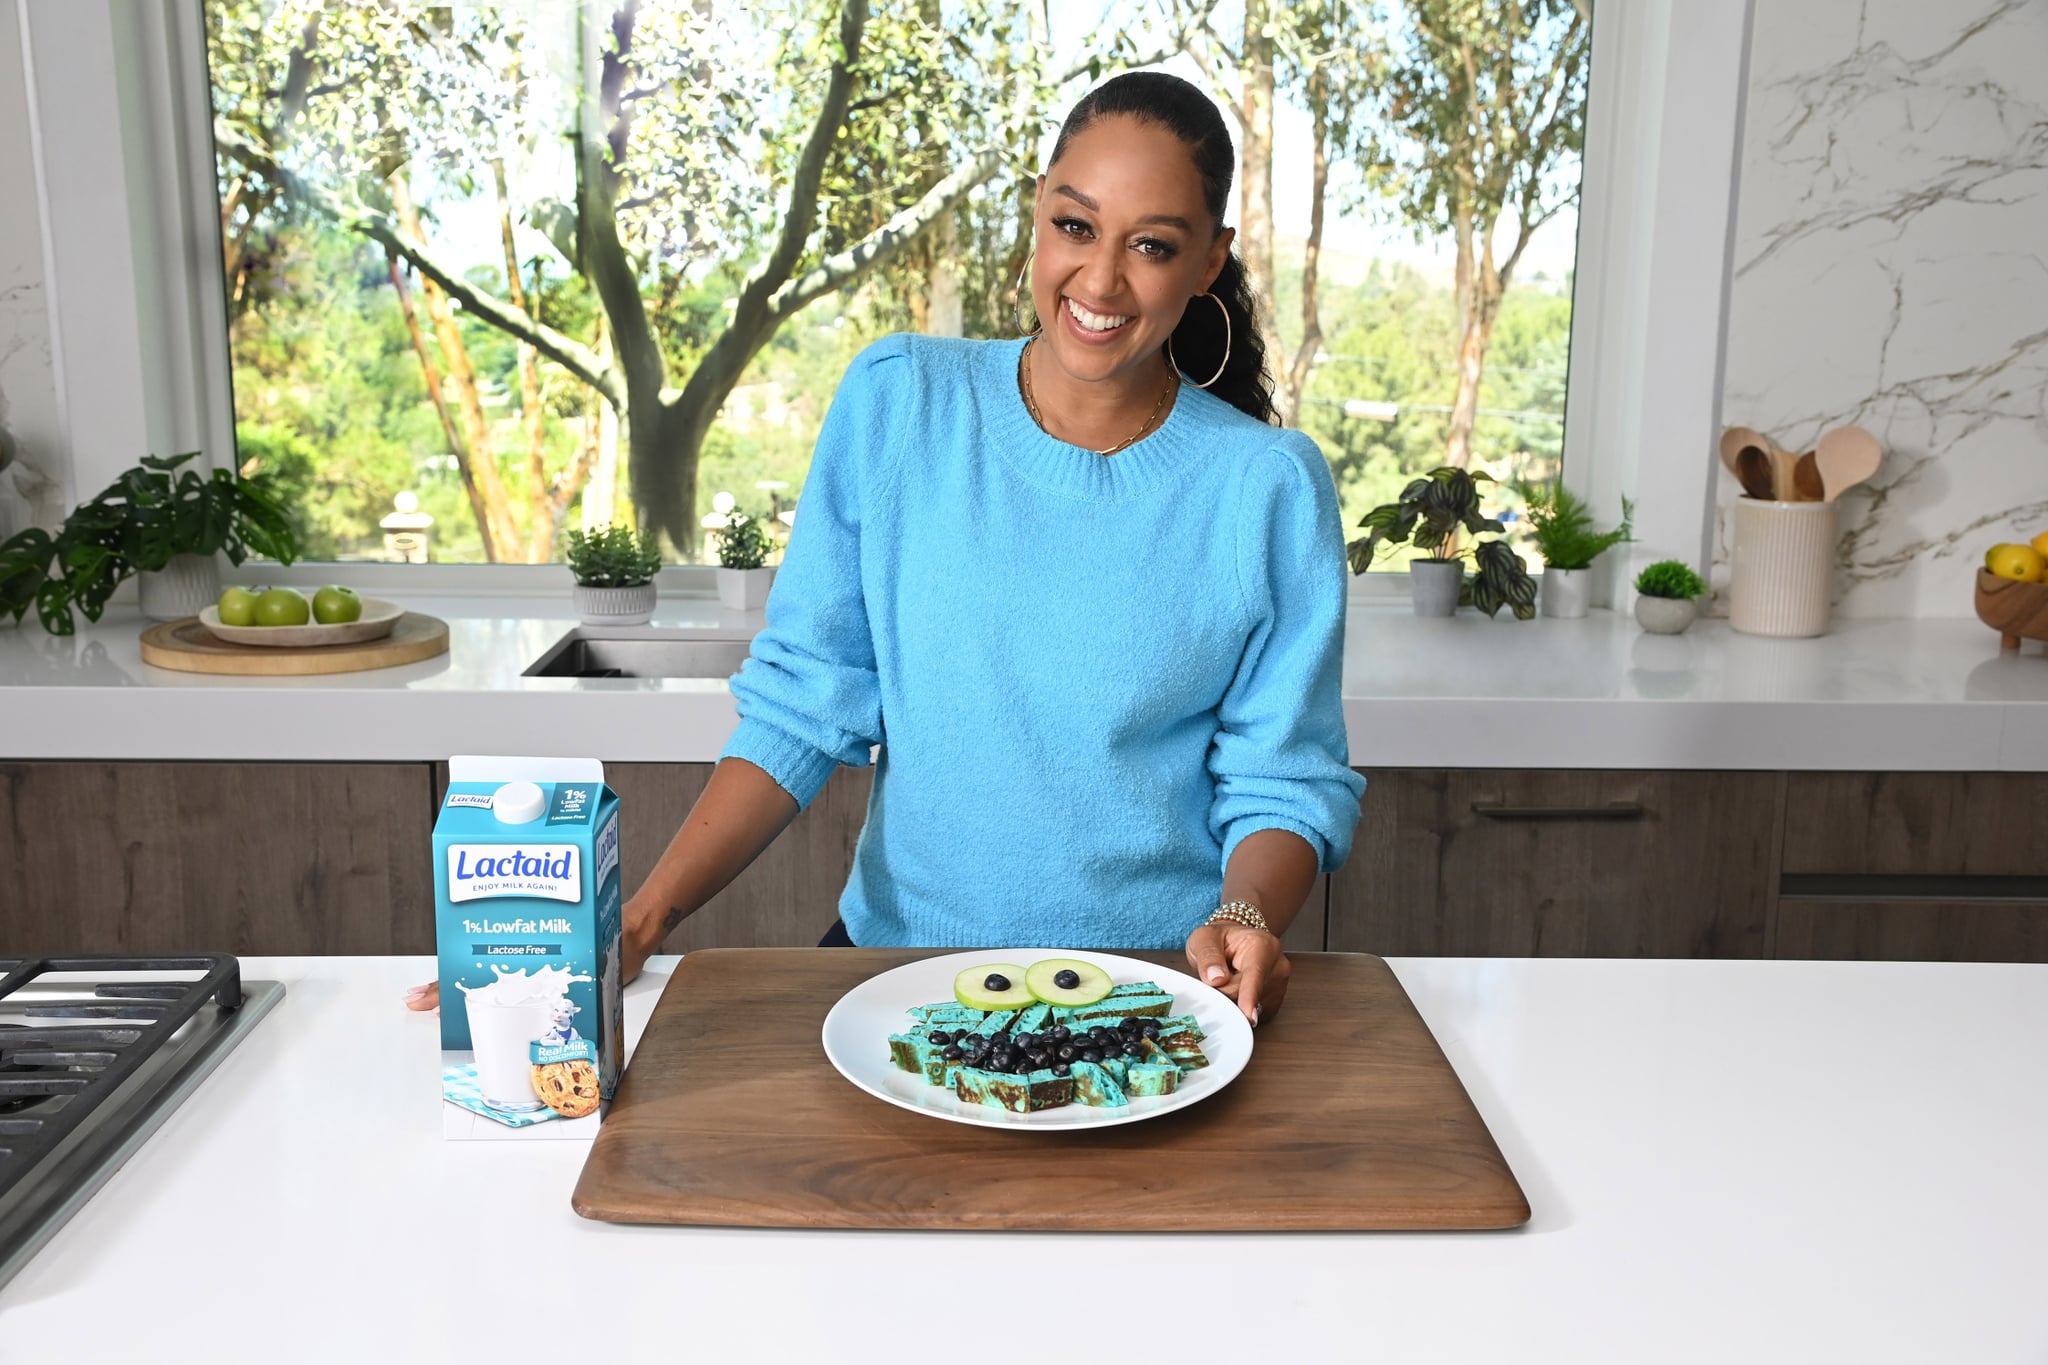 - Los Angeles, CA - 07/19/2022 - Tia Mowry uses LACTAID 100% real milk, just without the lactose, to create a recipe that her entire family can enjoy!-PICTURED: Tia Mowry-PHOTO by: Michael Simon/startraksphoto.com-MS228708Editorial - Rights Managed Image - Please contact www.startraksphoto.com for licensing fee Startraks PhotoStartraks PhotoNew York, NY For licensing please call 212-414-9464 or email sales@startraksphoto.comImage may not be published in any way that is or might be deemed defamatory, libelous, pornographic, or obscene. Please consult our sales department for any clarification or question you may haveStartraks Photo reserves the right to pursue unauthorized users of this image. If you violate our intellectual property you may be liable for actual damages, loss of income, and profits you derive from the use of this image, and where appropriate, the cost of collection and/or statutory damages.